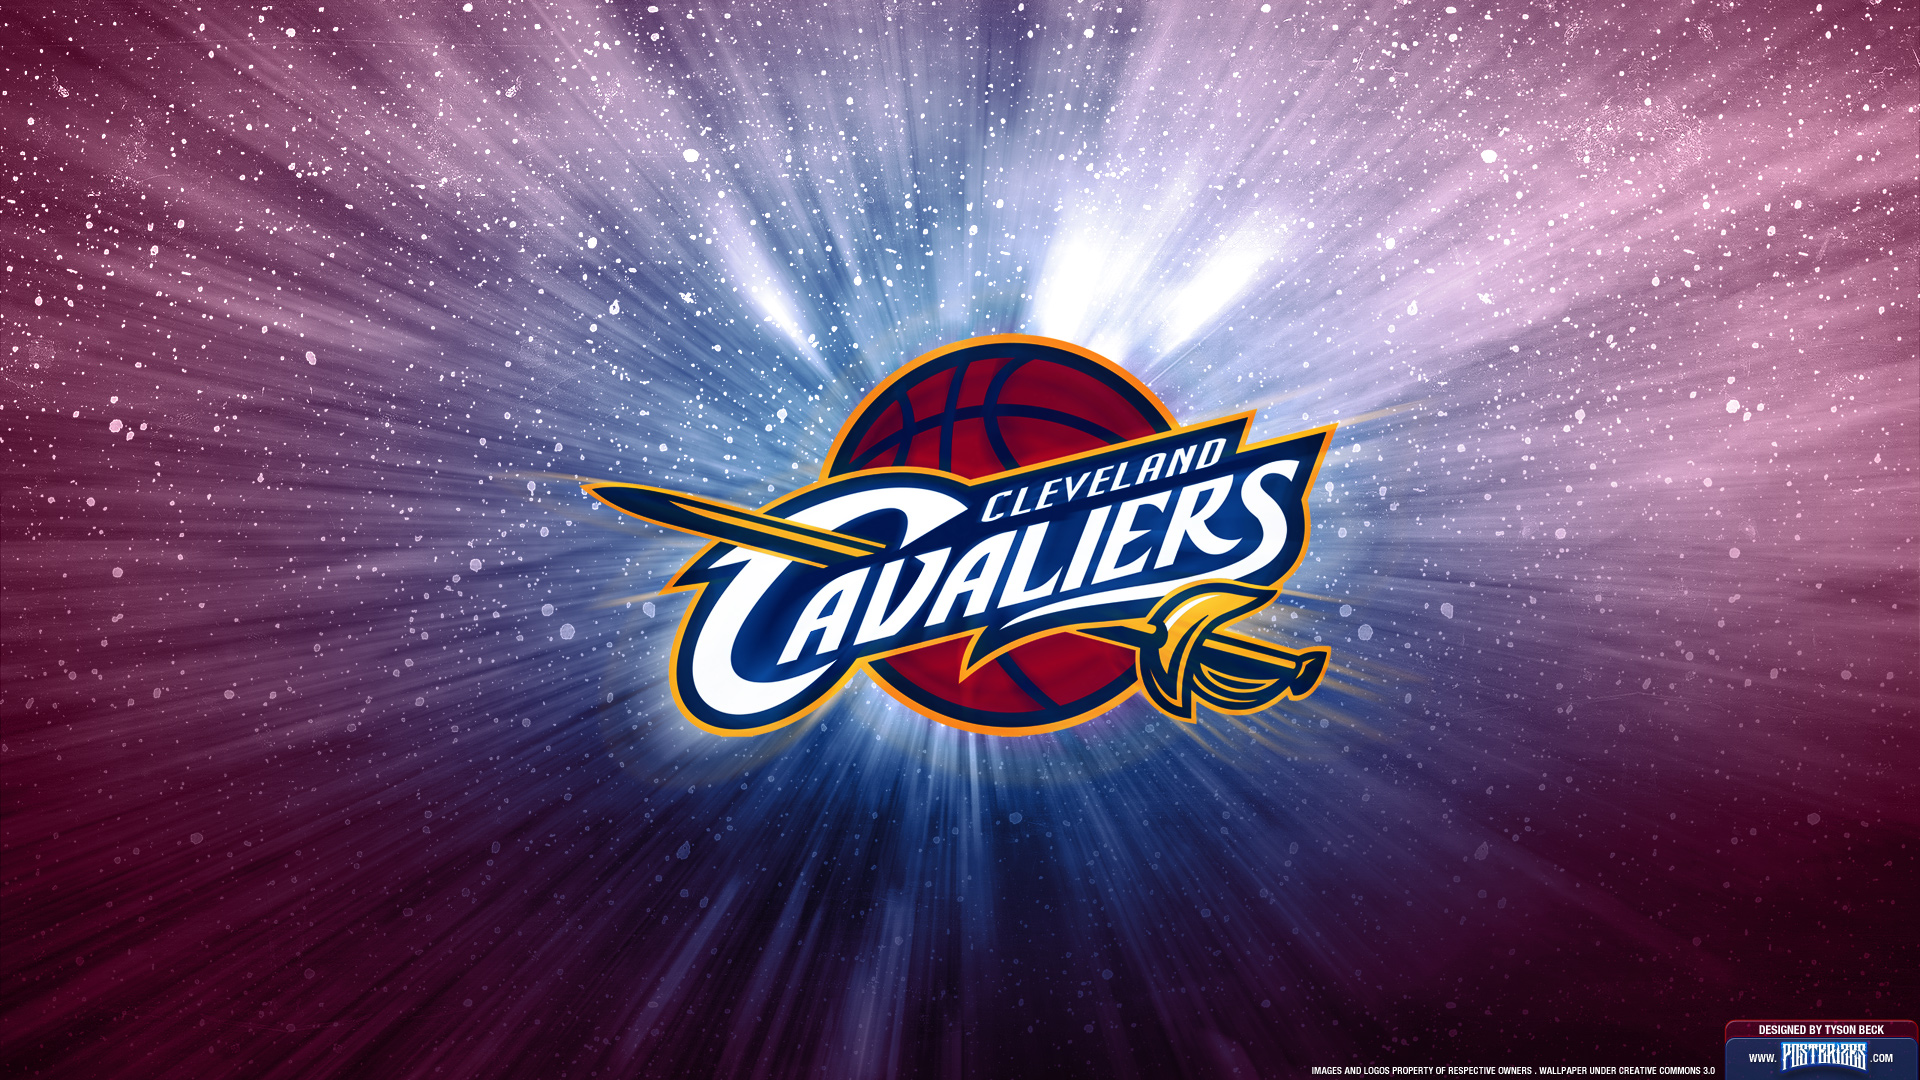 Cleveland Cavaliers Roster Search Results All In One Media